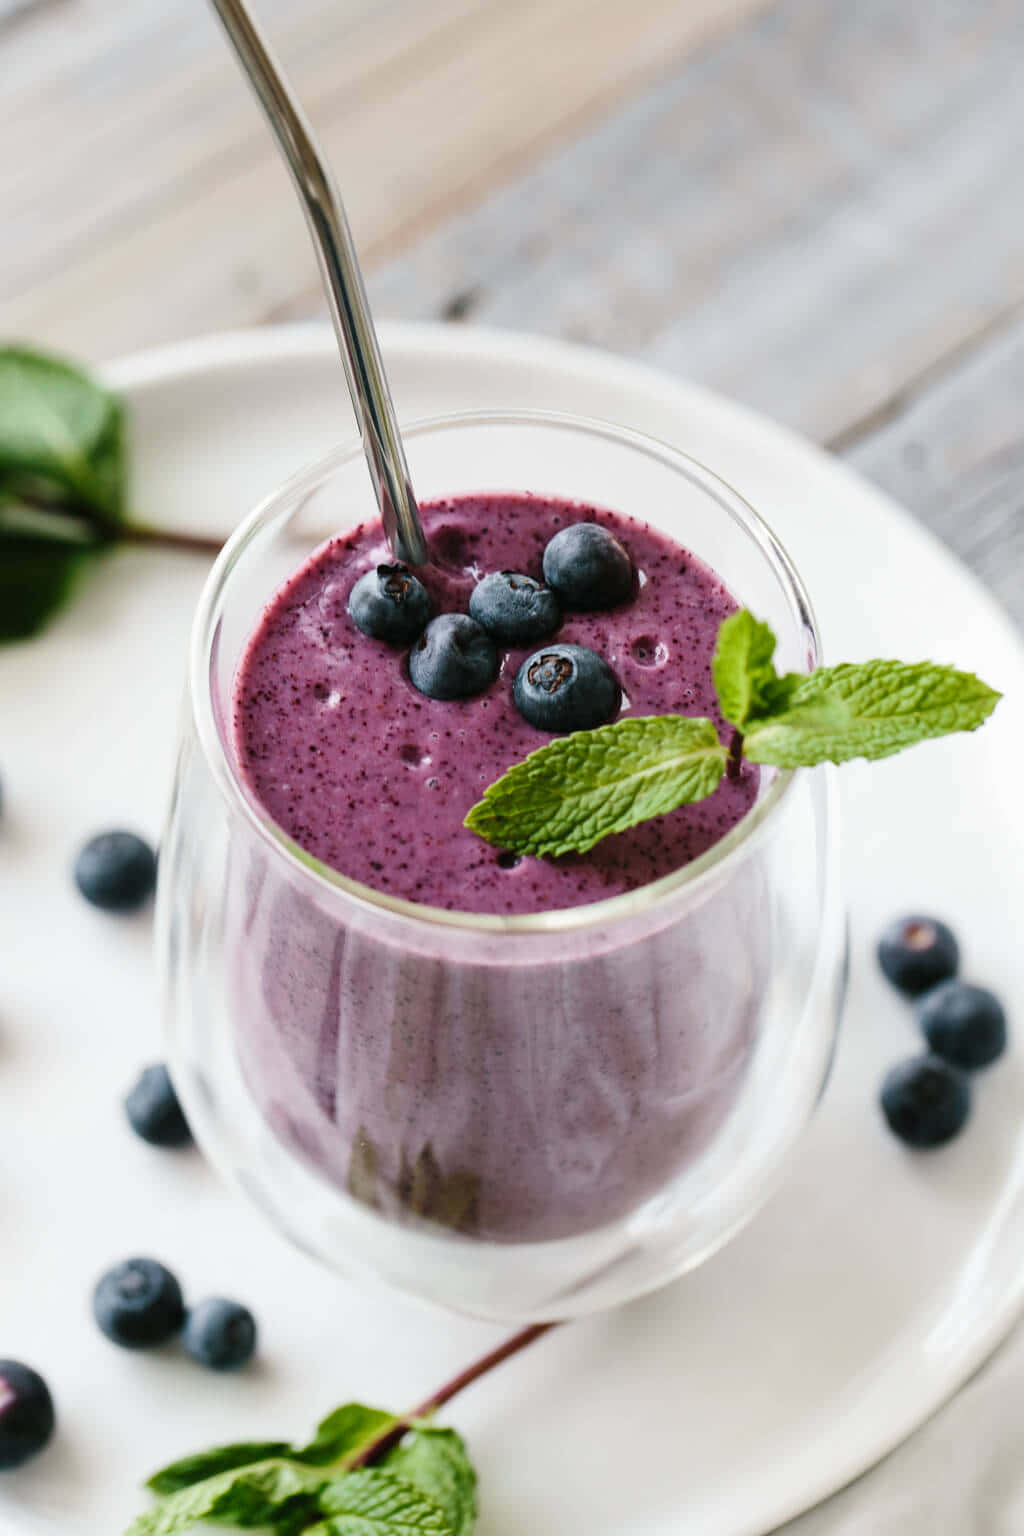 Start your day with a healthy and delicious Blueberry Smoothie! Wallpaper